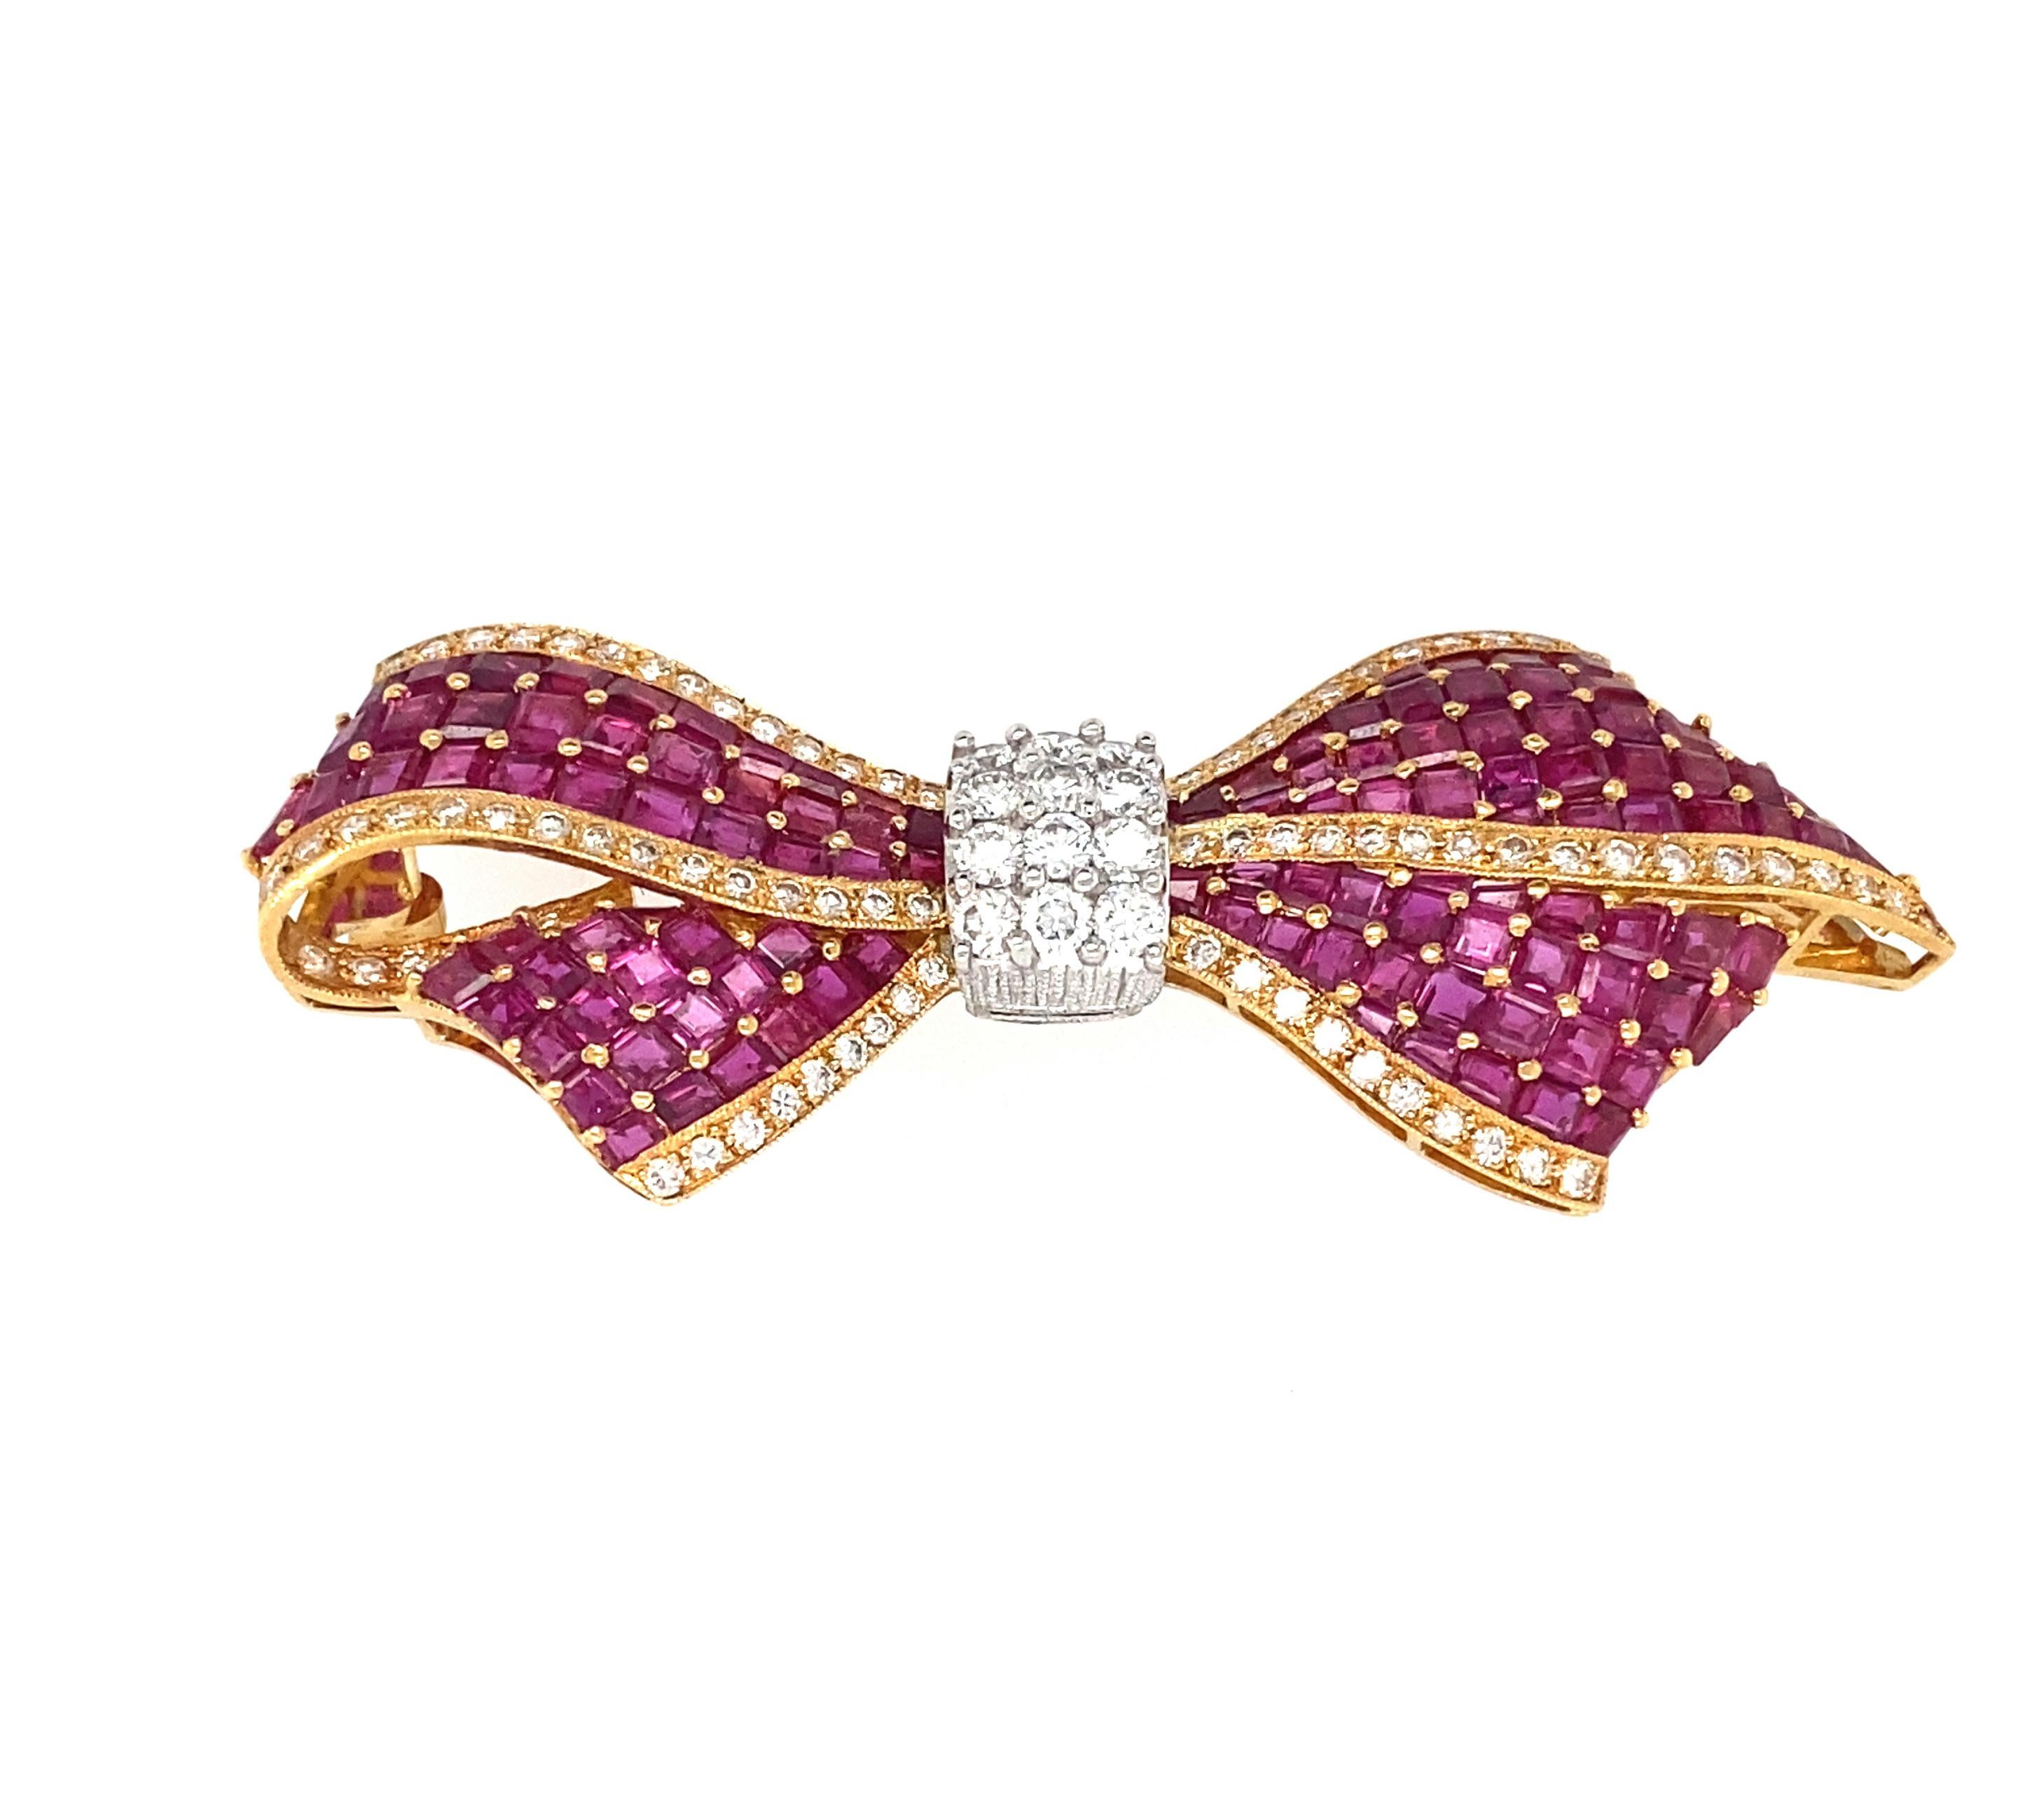 PLATINUM AND 18K YELLOW GOLD 10.00 CARAT RUBY AND 1.6 CARAT DIAMOND BOW BROOCH BY OSCAR HEYMAN
stamped PT 750 74164, round cut diamonds, color G/H, clarity VS, approx. 2cttw., calibre cut rubies, clarity VS, weight approx. 10 carats, 
measurement